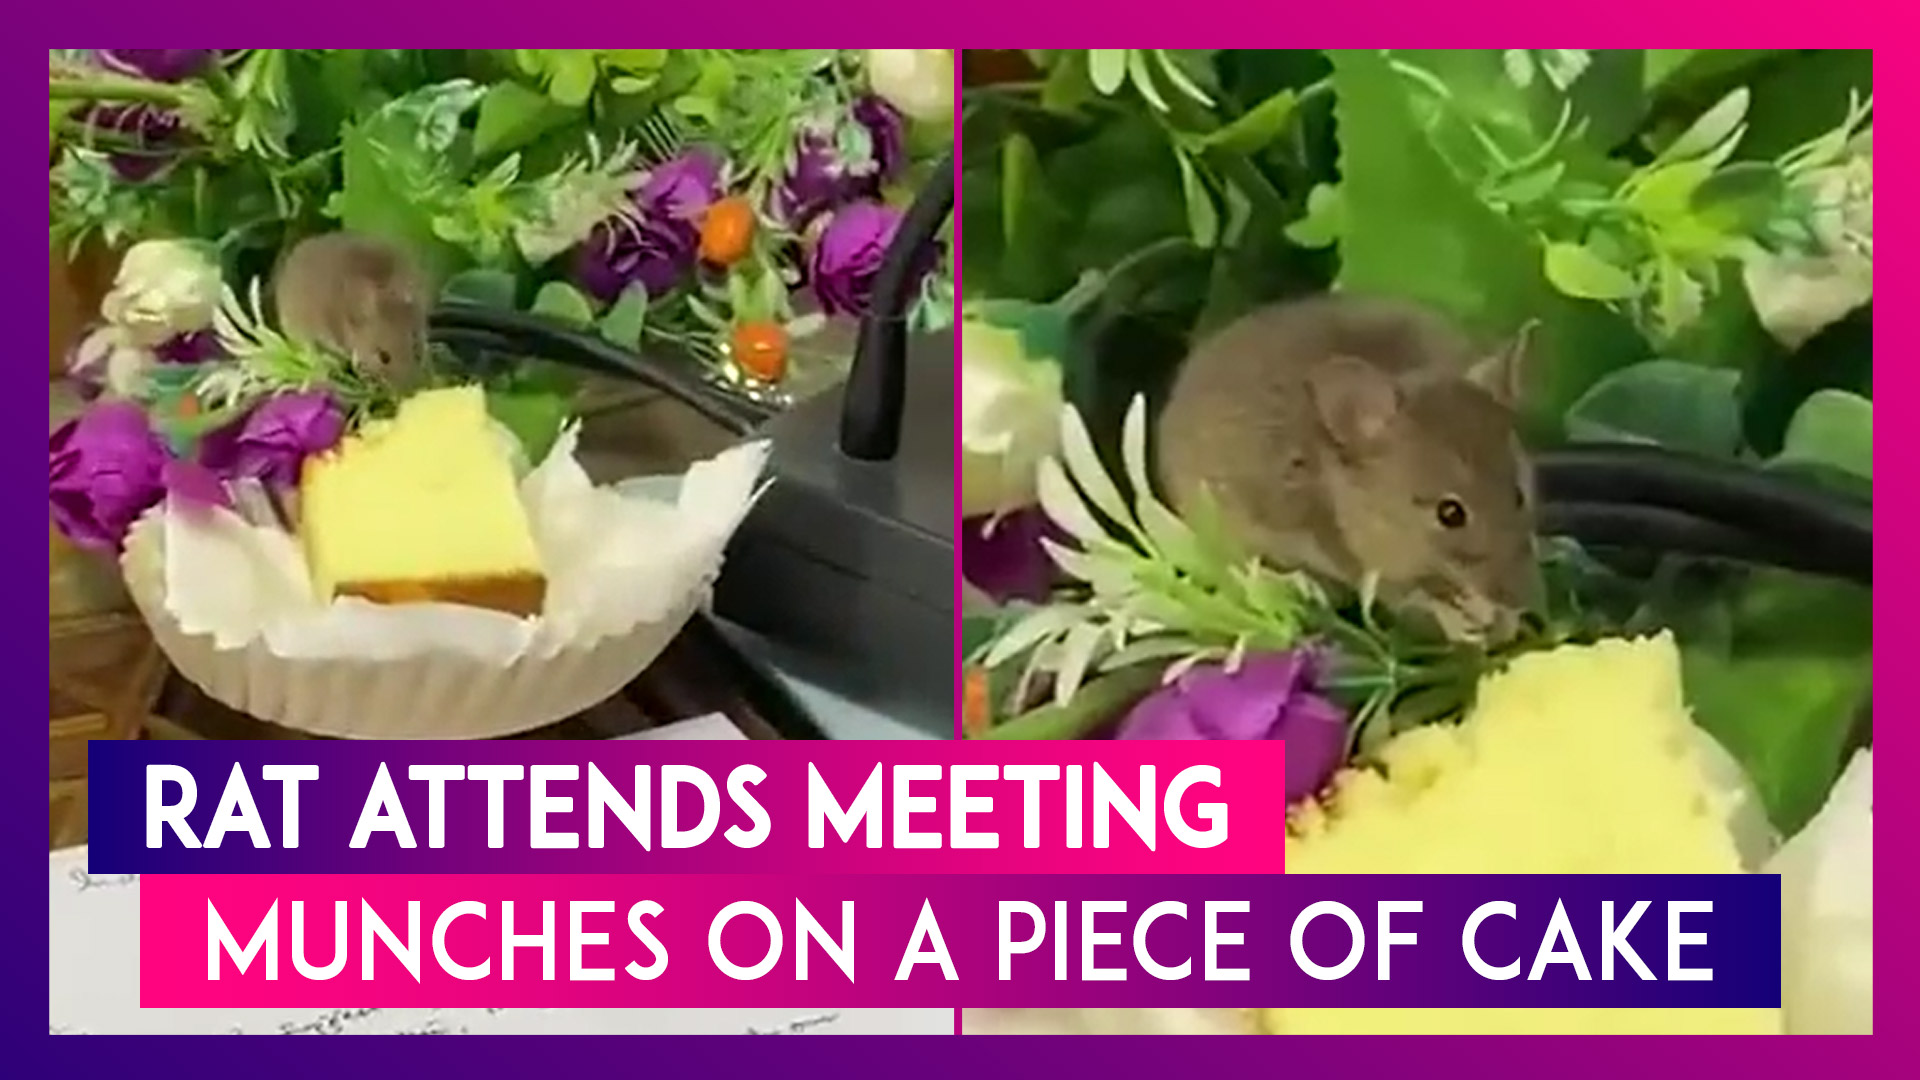 Video Shows Rat Munching On Piece Of Cake Served To People At A Meeting